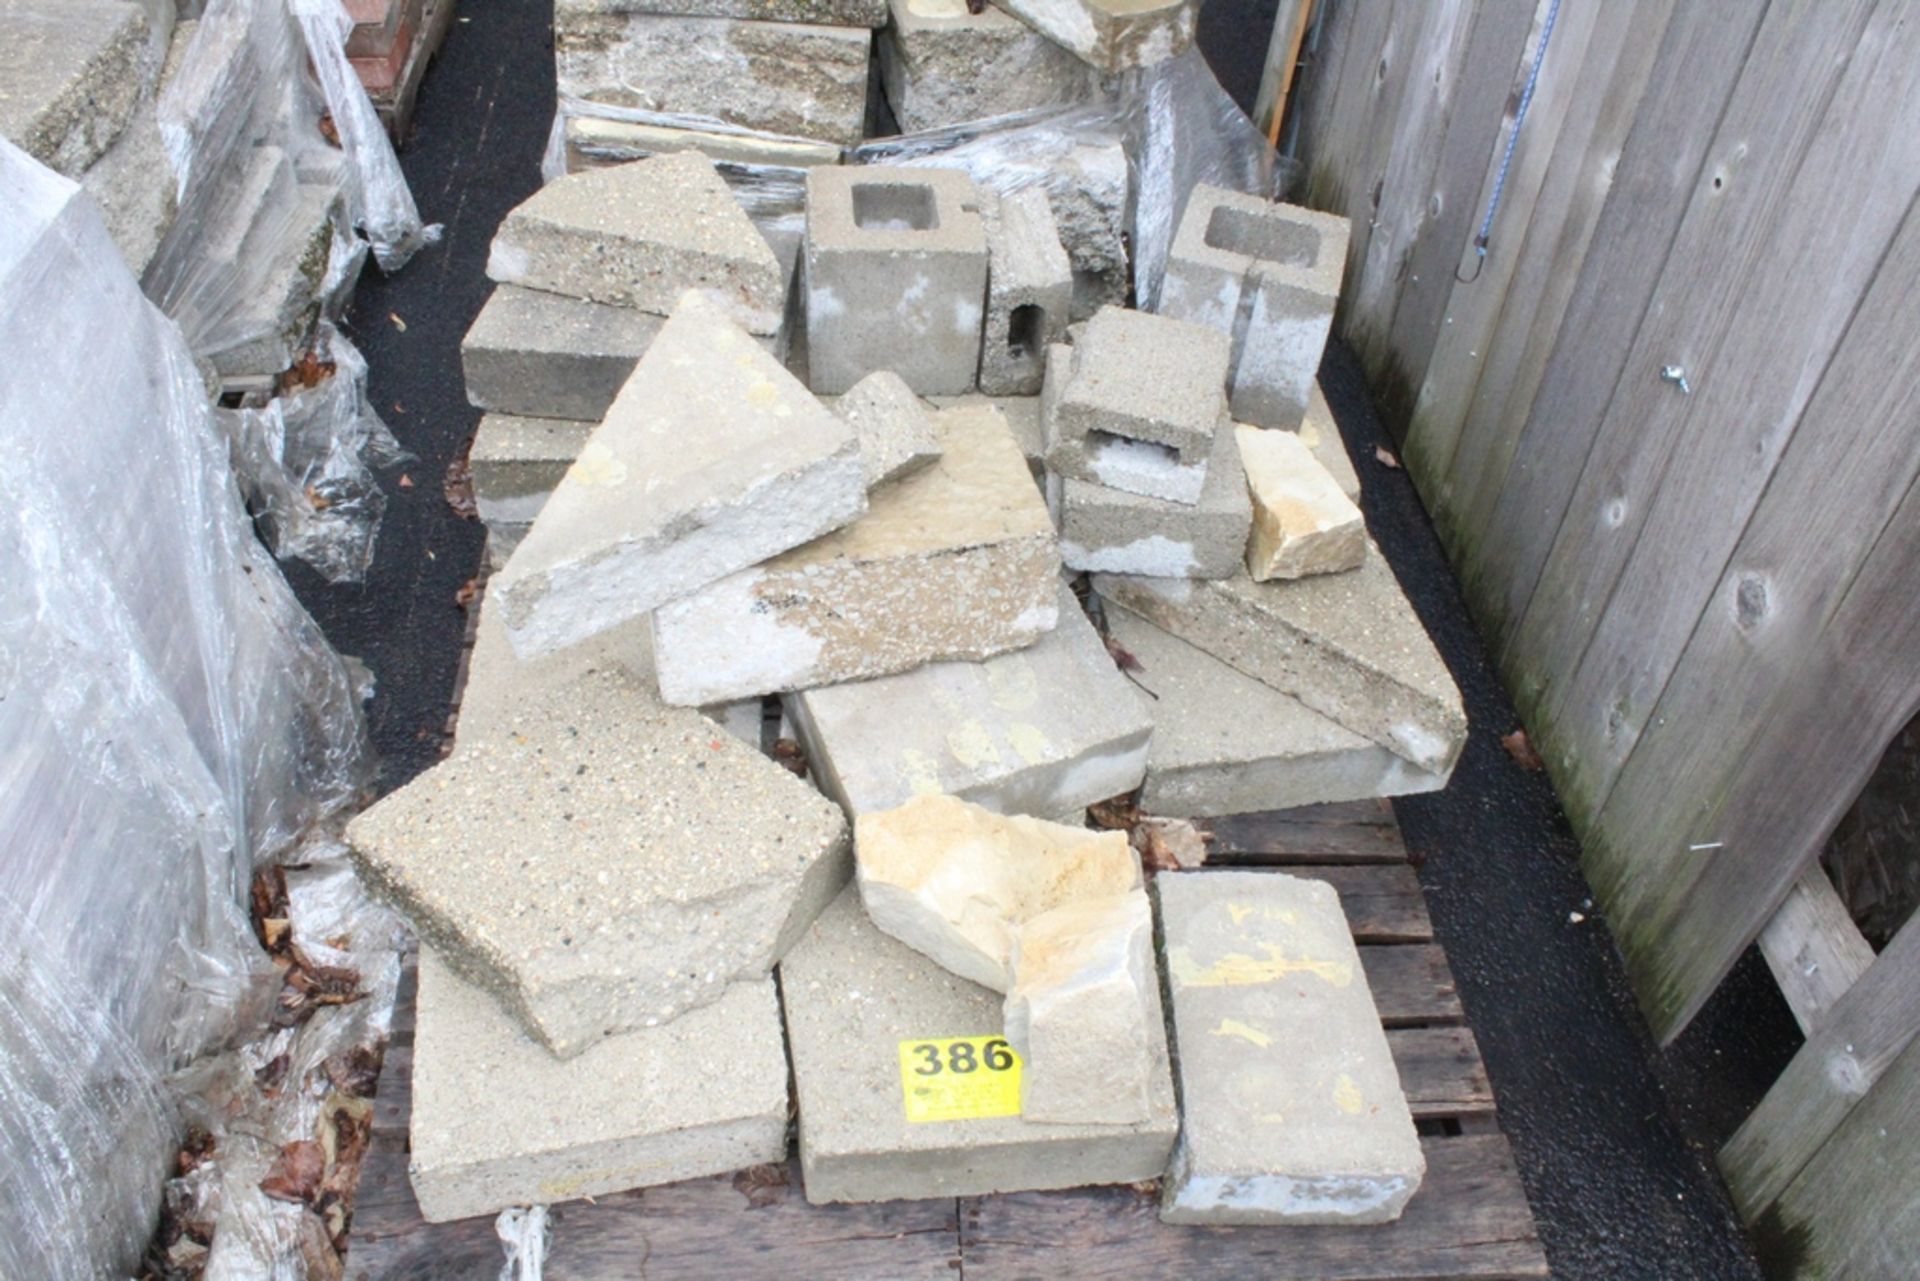 ASSORTED CONCRETE BLOCKS ON SKID - THIS ITEM LOCATED AT 1530 WILEY ROAD, SCHAUMBURG, ILA